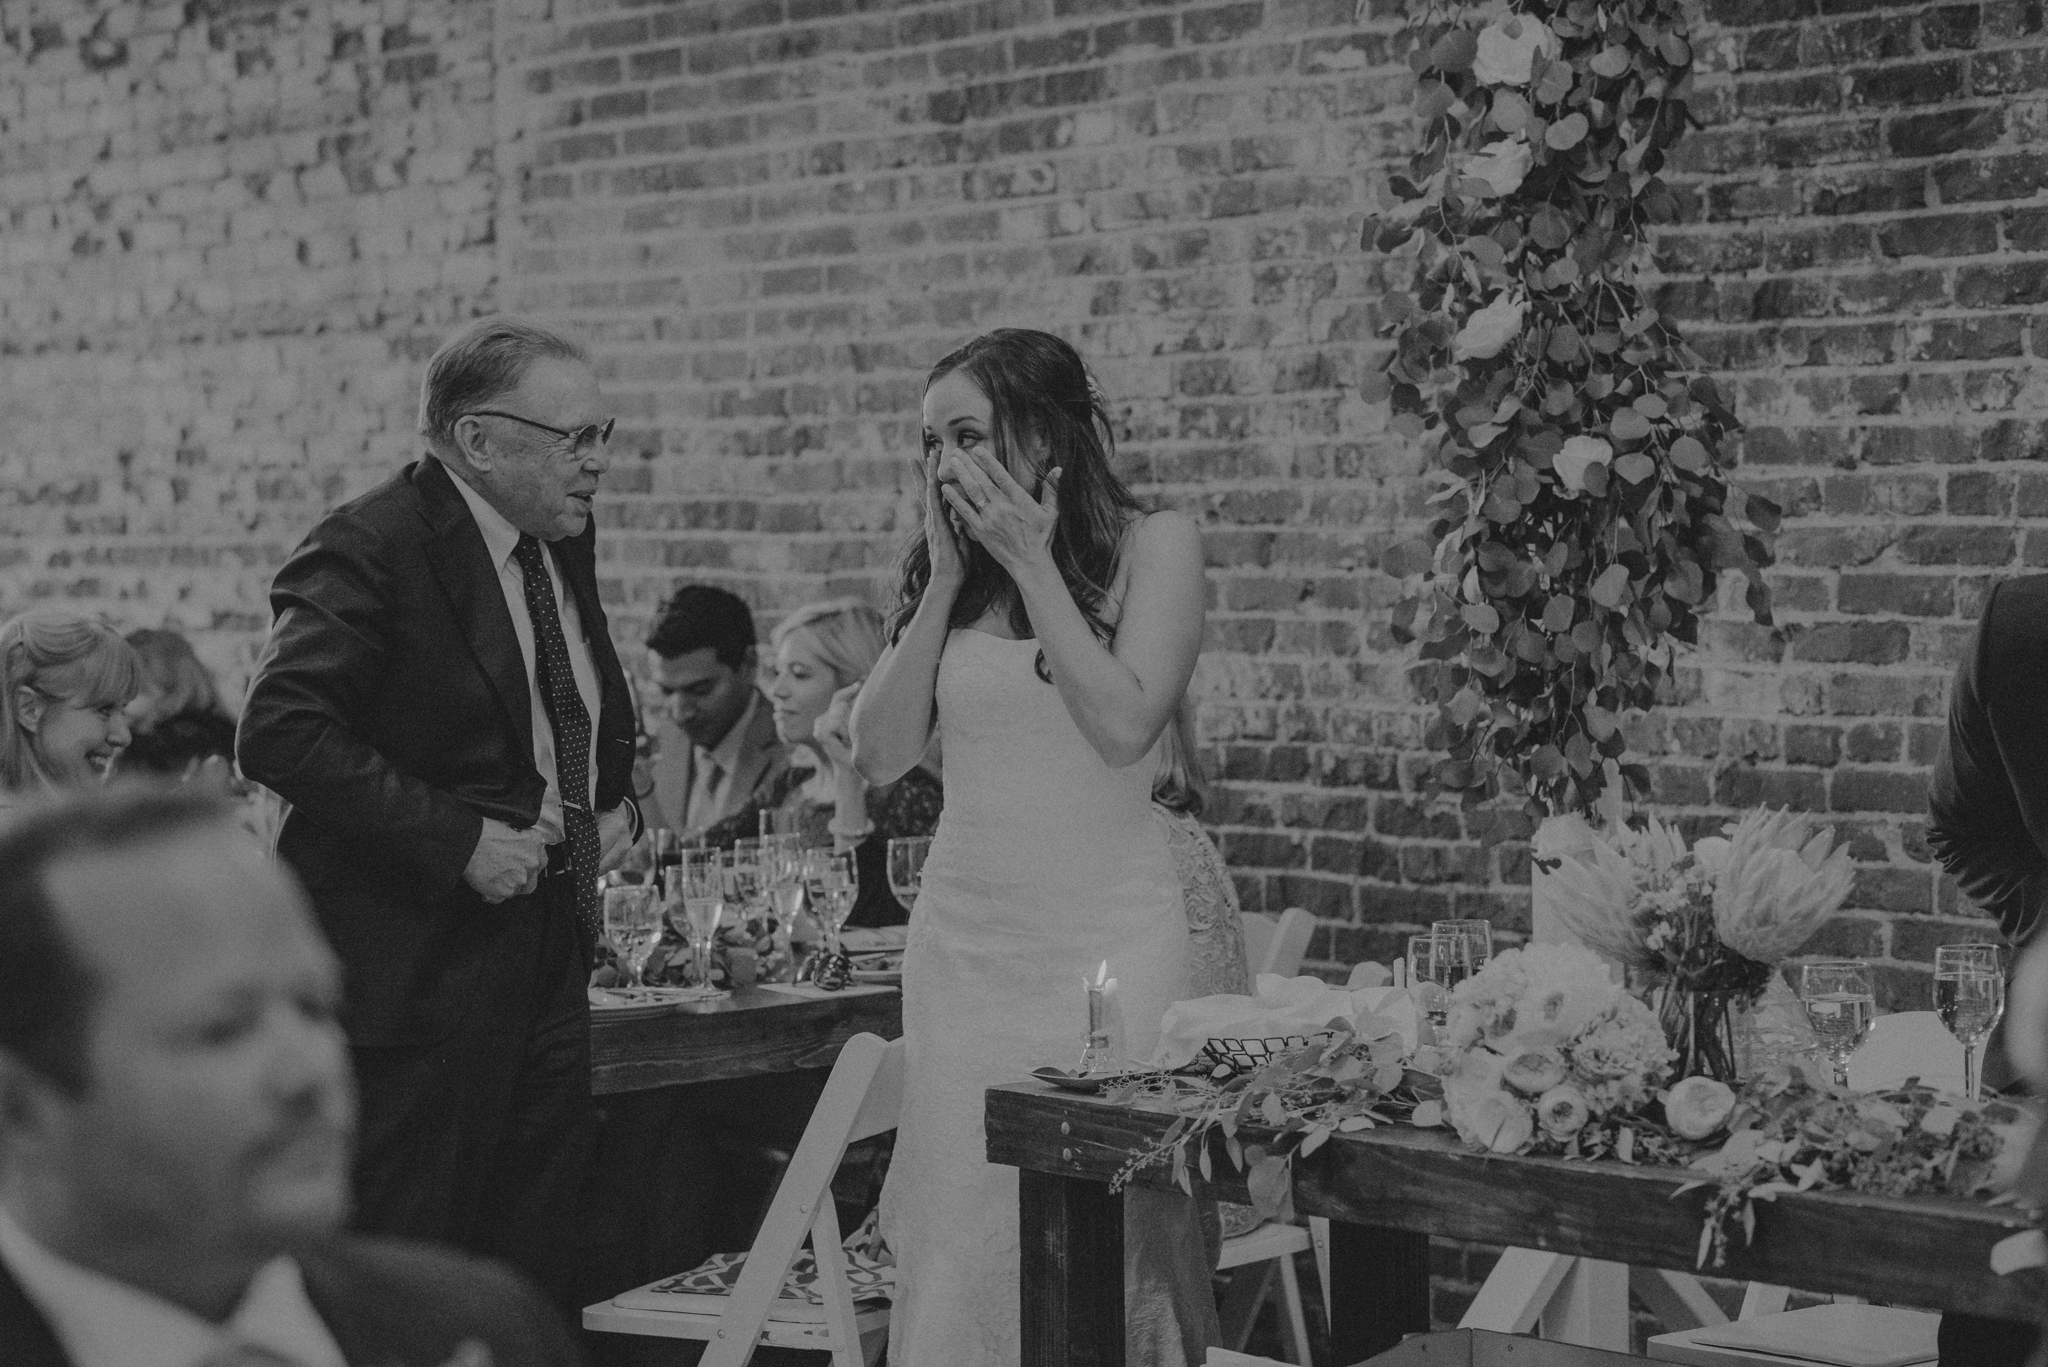 The Unique Space Wedding Photographer - Los Angeles Wedding Photography - IsaiahAndTaylor.com-127.jpg